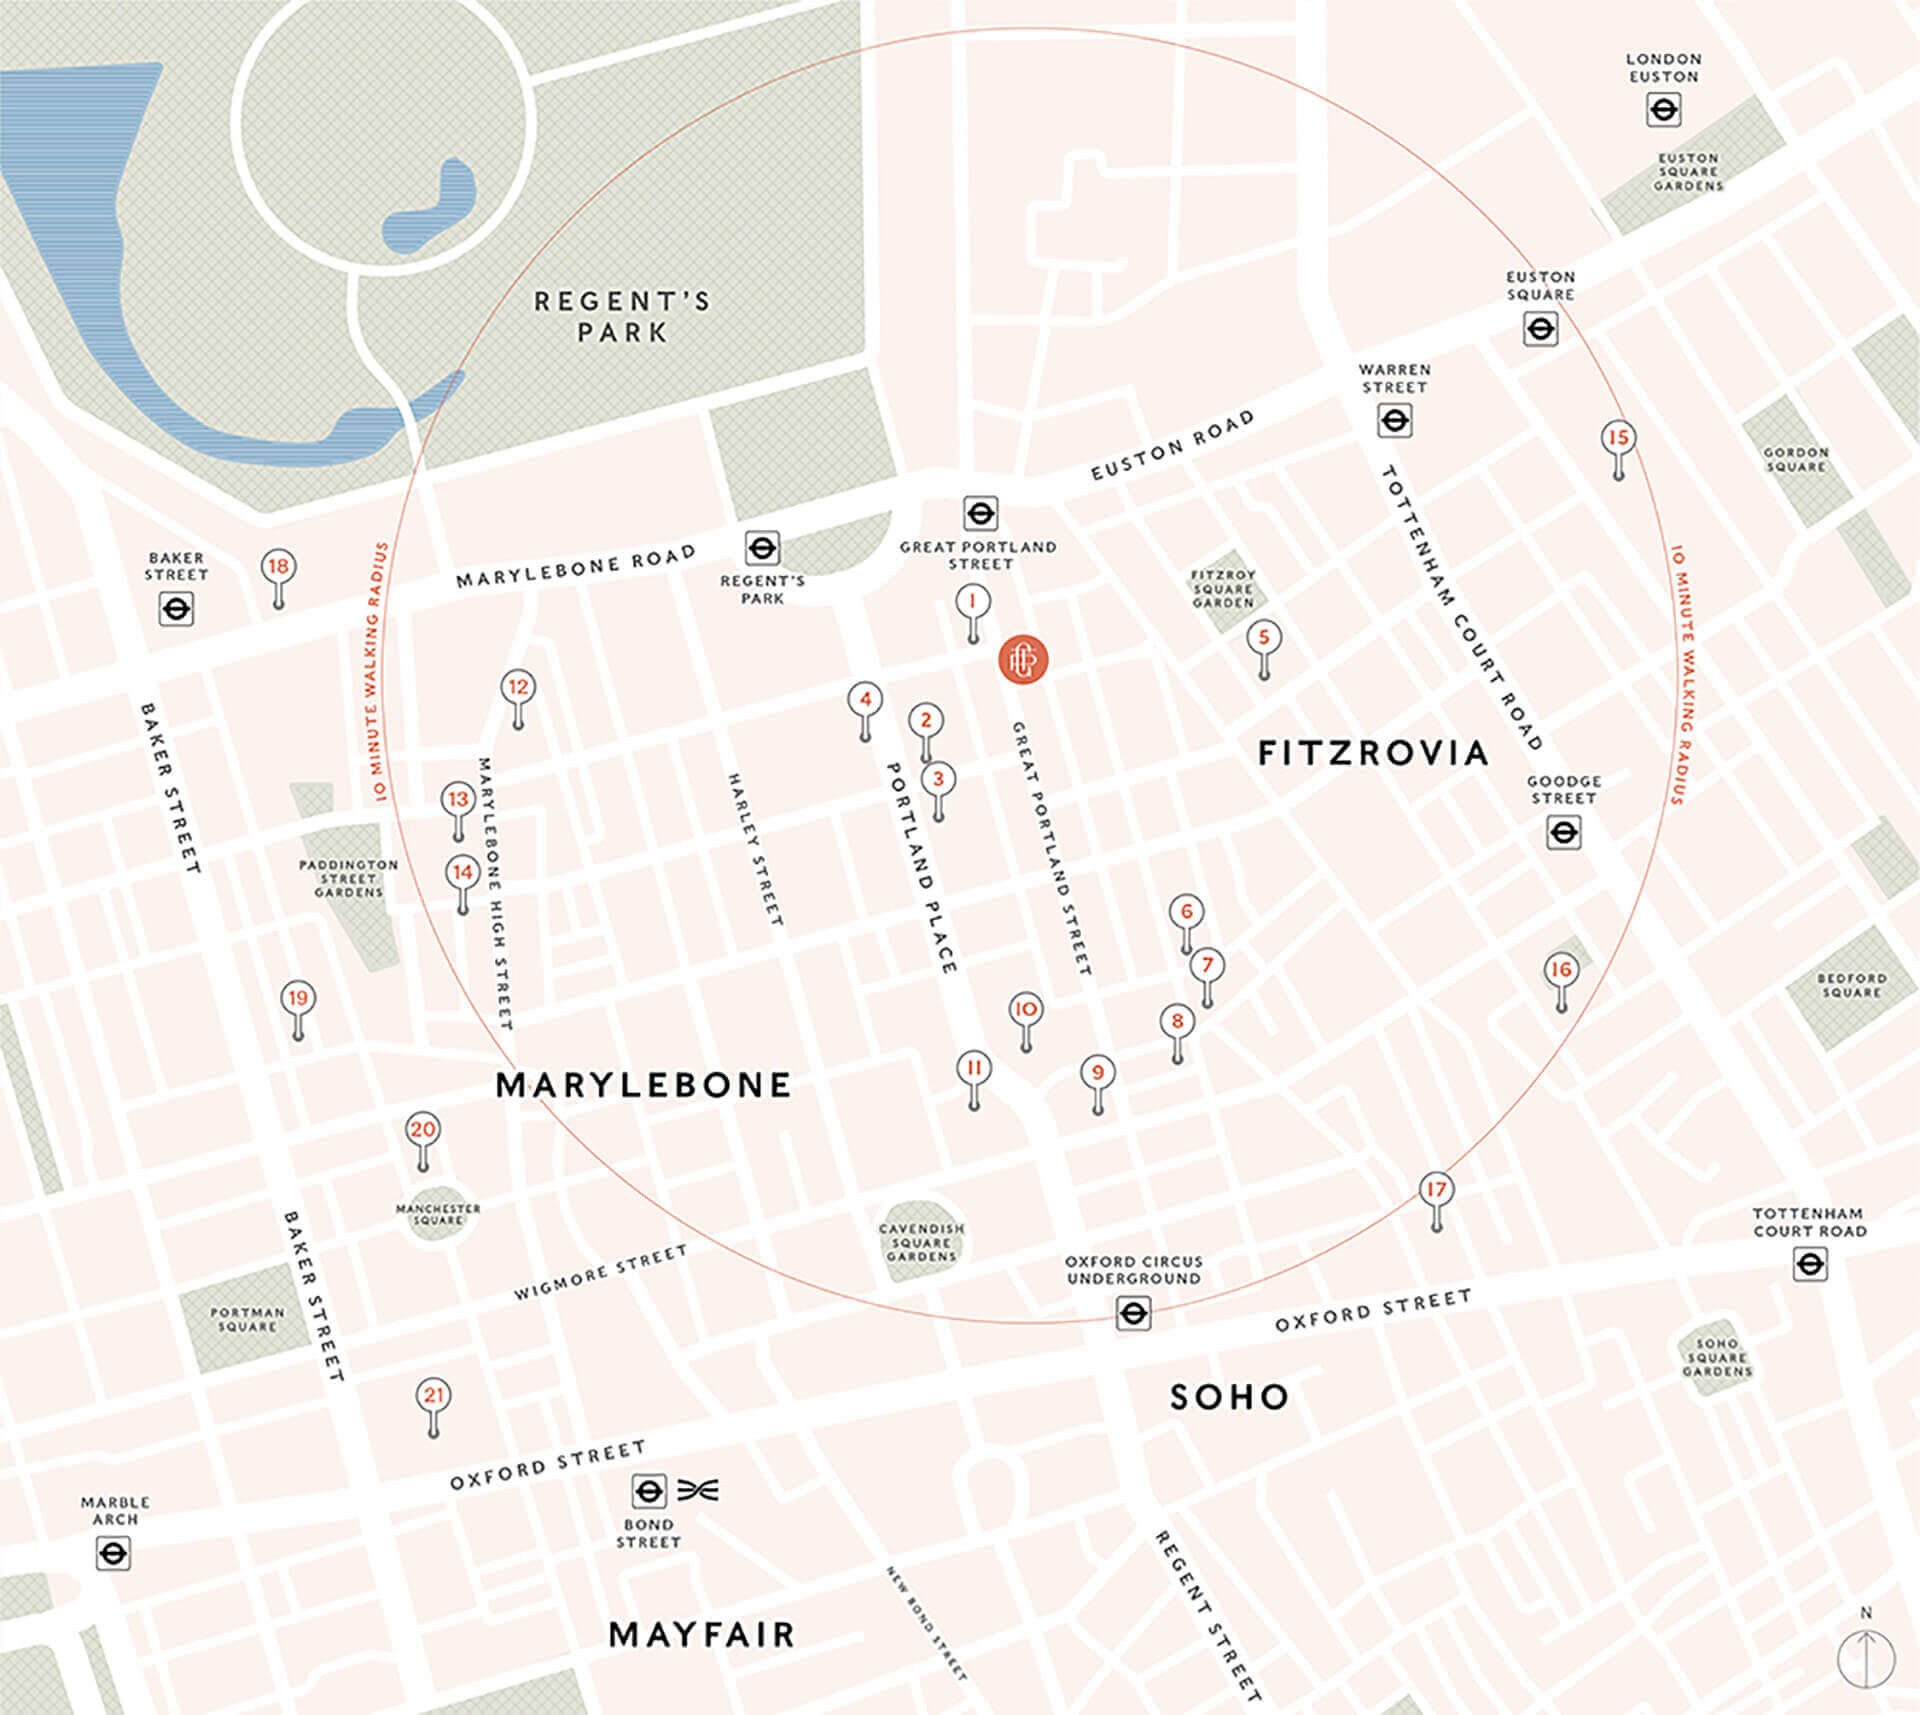 w1 place is located between marylebone and fitzrovia near regents park